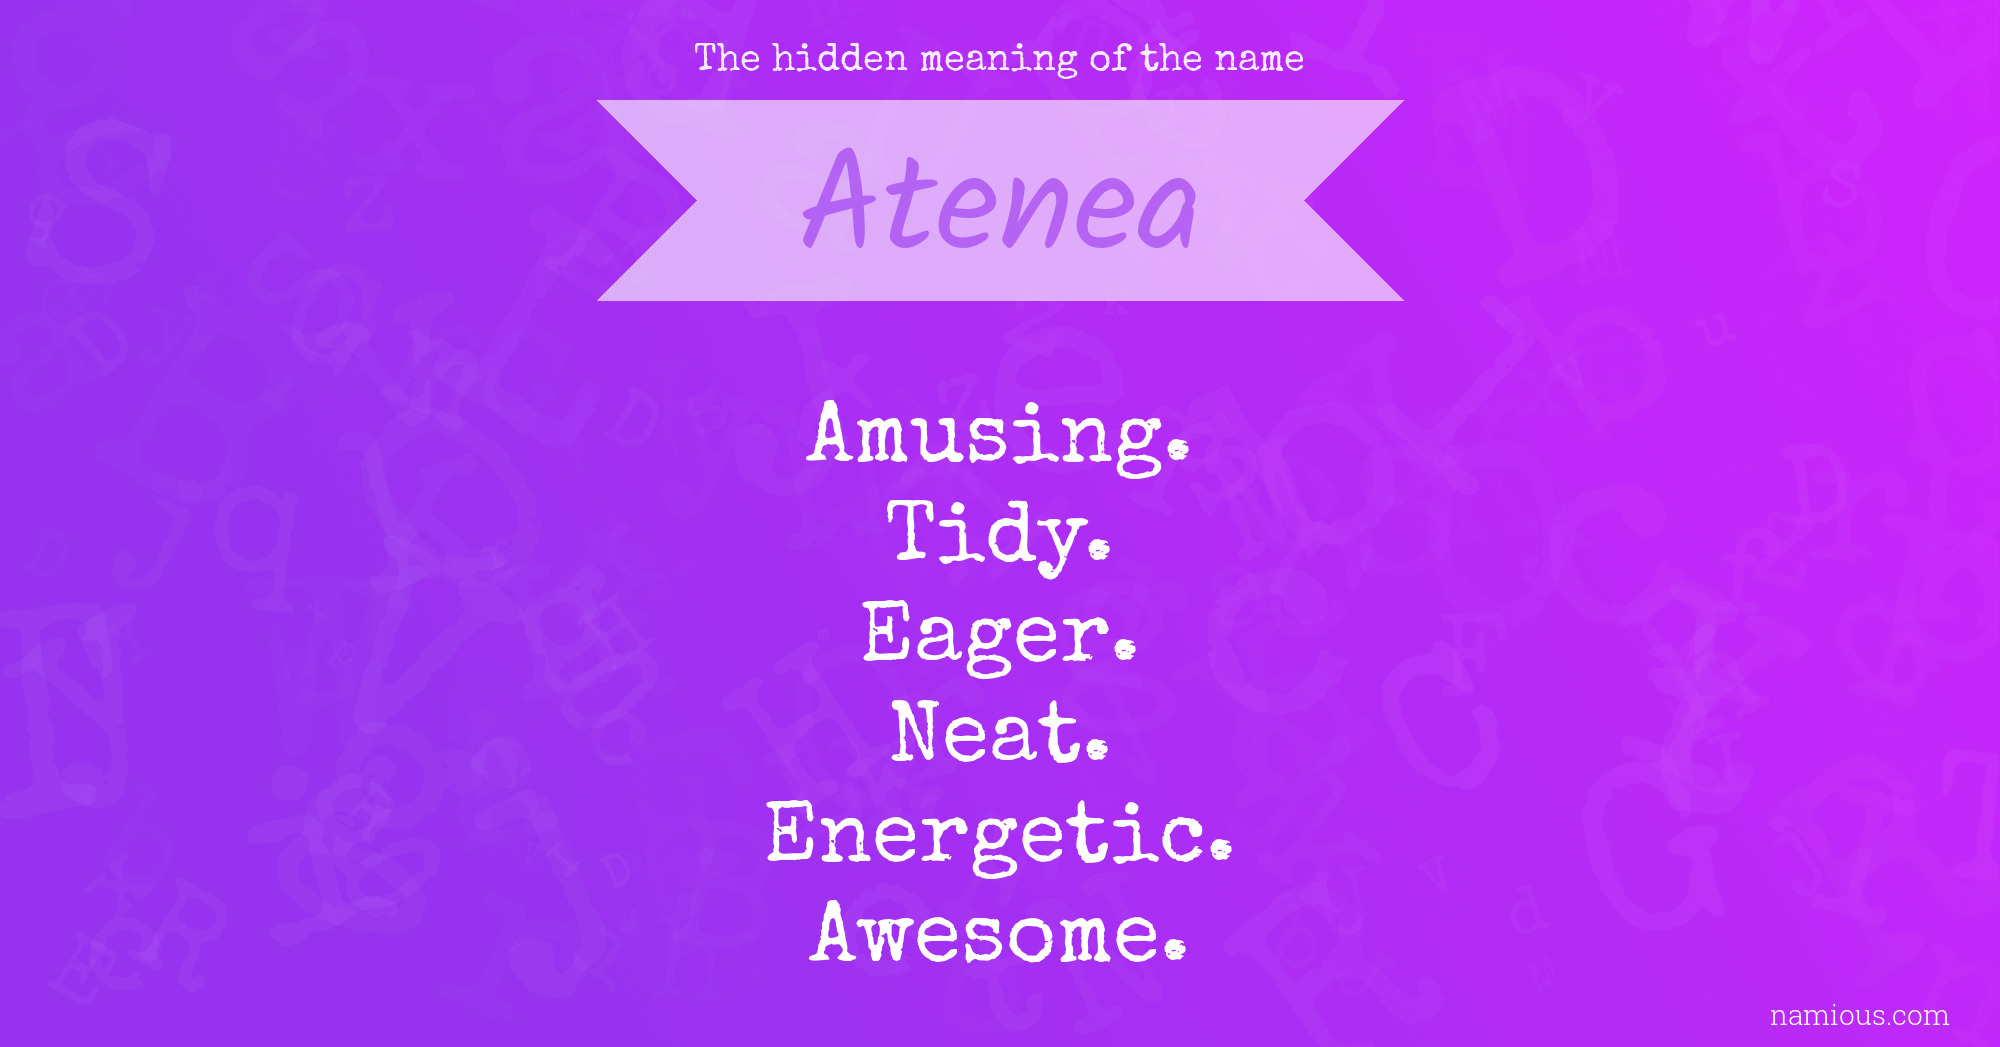 The hidden meaning of the name Atenea